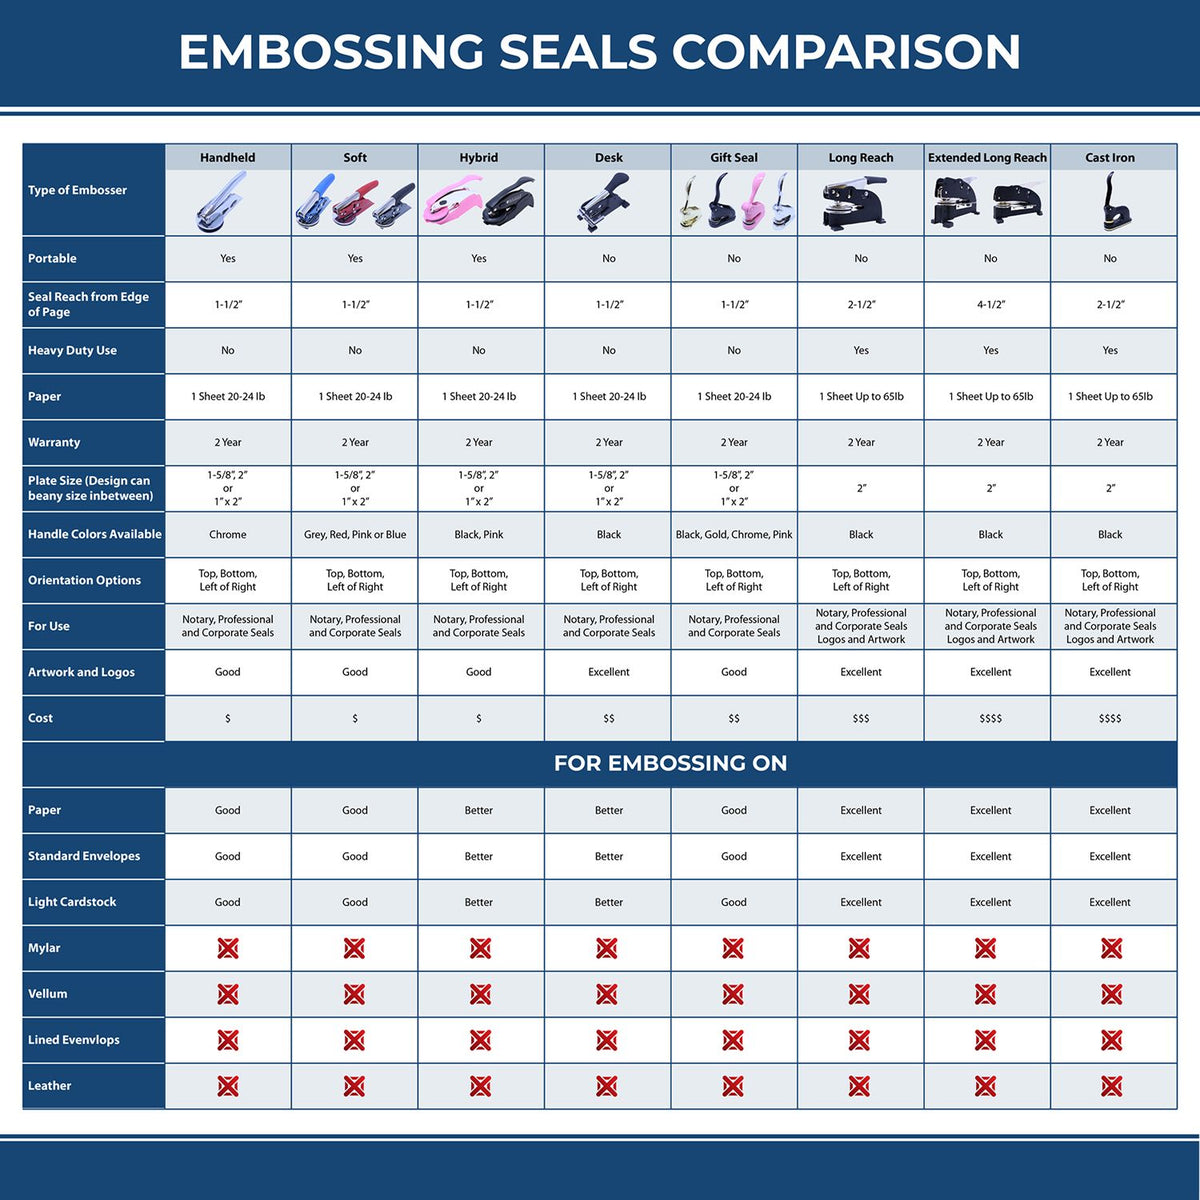 A comparison chart for the different types of mount models available for the Virginia Desk Architect Embossing Seal.